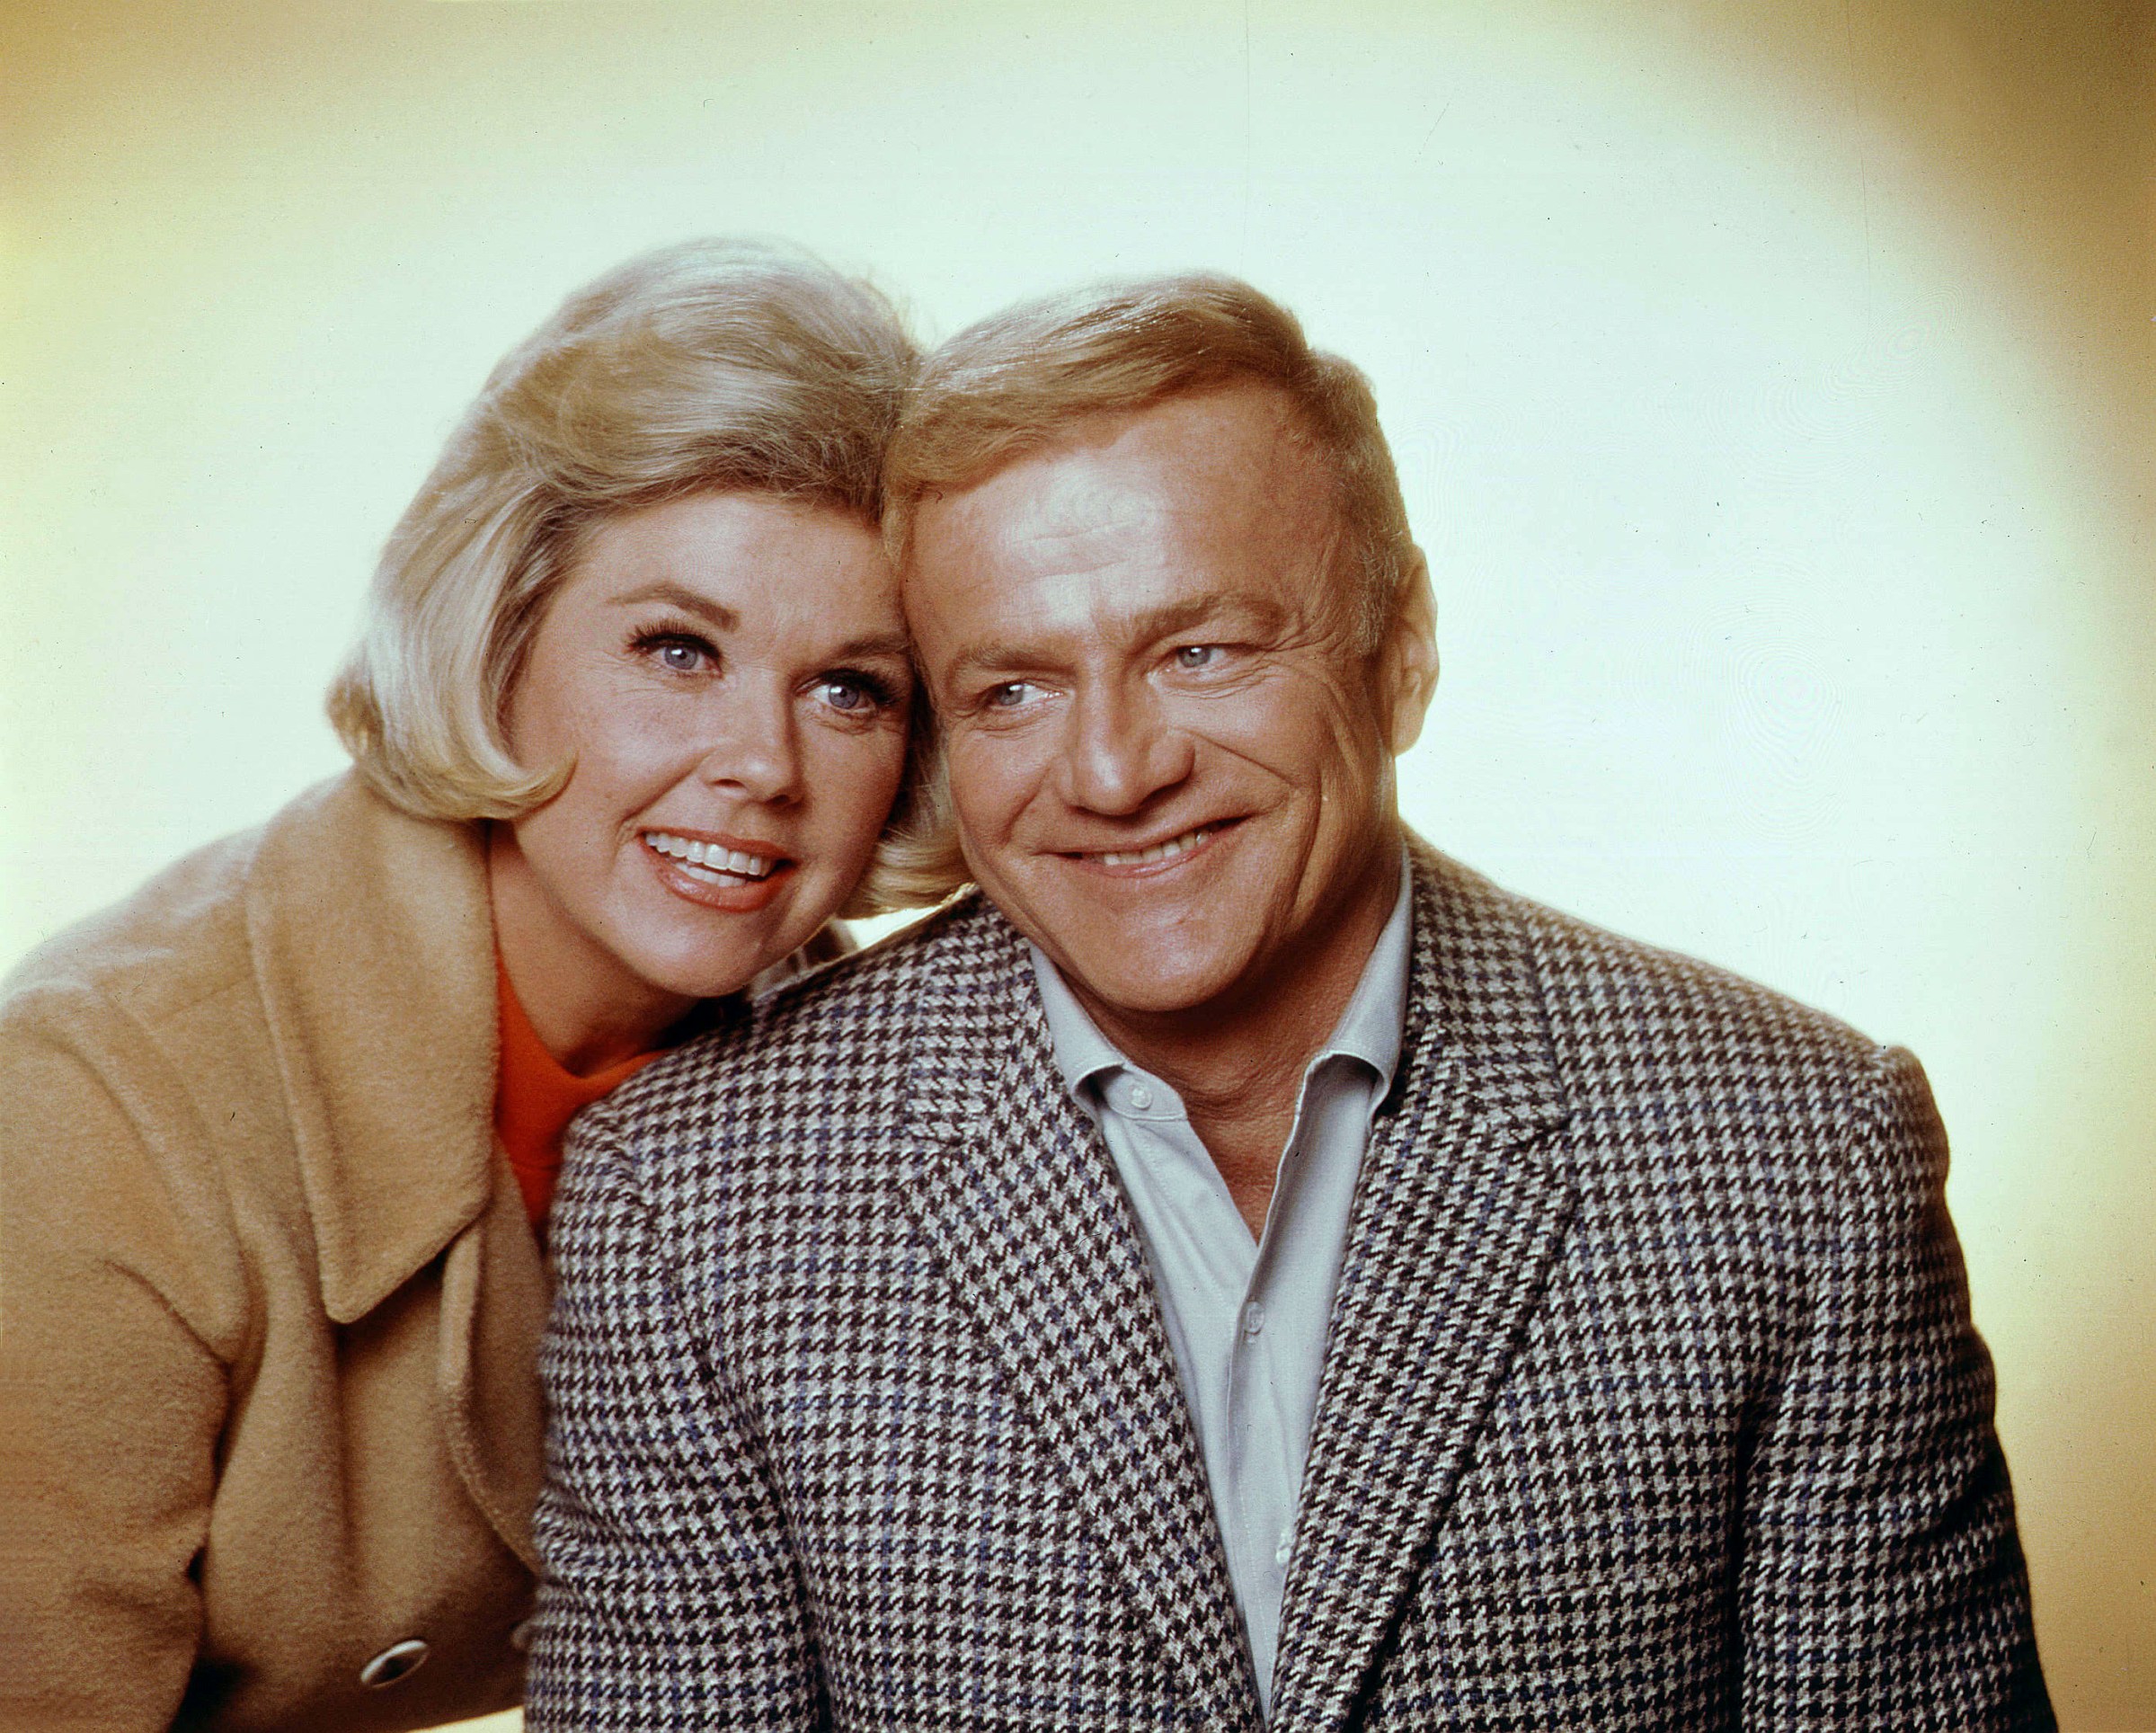 Here's What Happened to 'Family Affair' Star Brian Keith